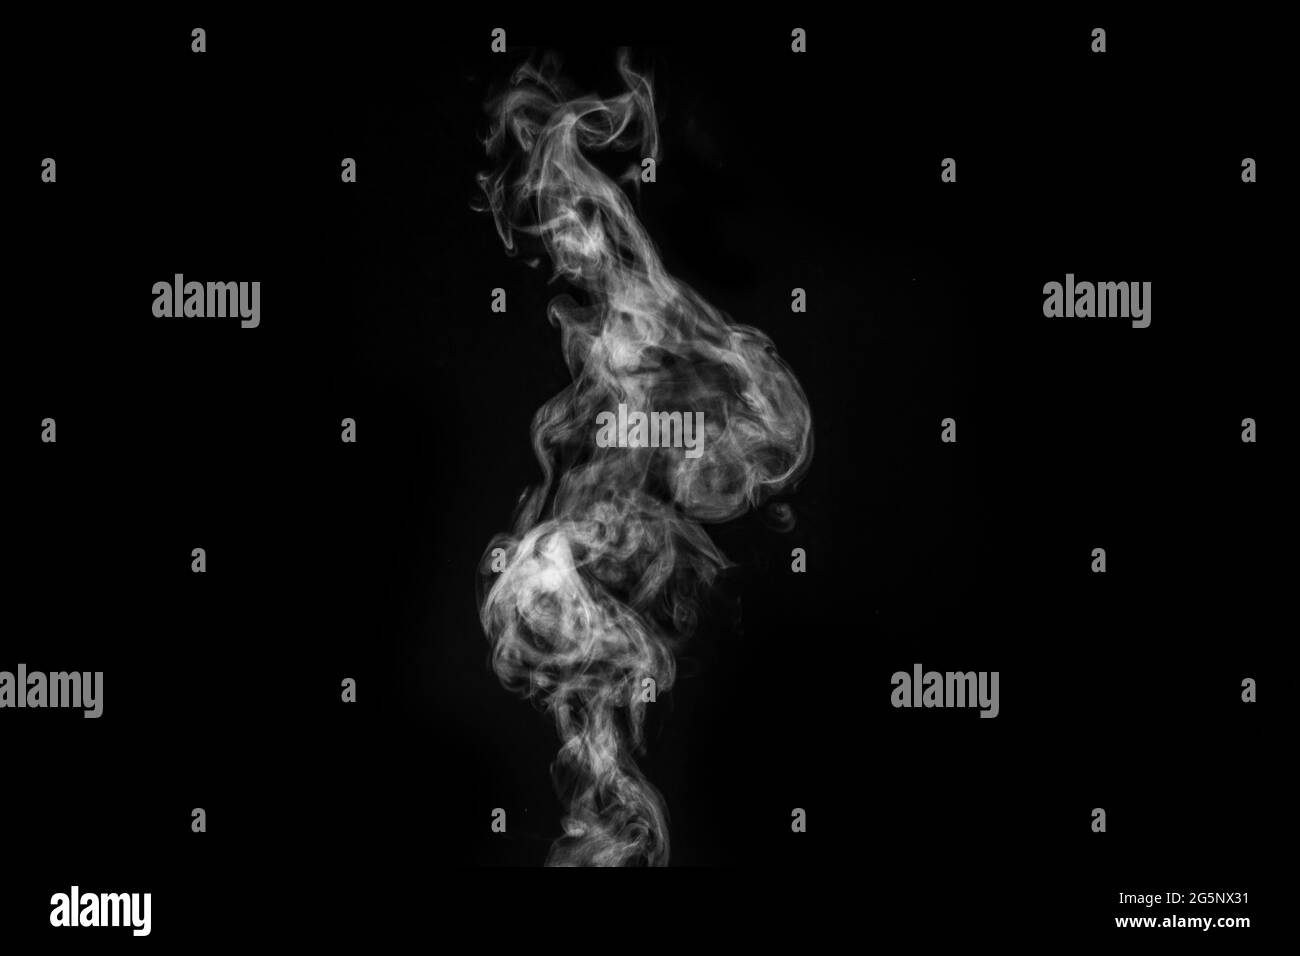 Perfect mystical curly white steam or smoke isolated on black background. Abstract background fog or smog, design element for Halloween, layout for co Stock Photo